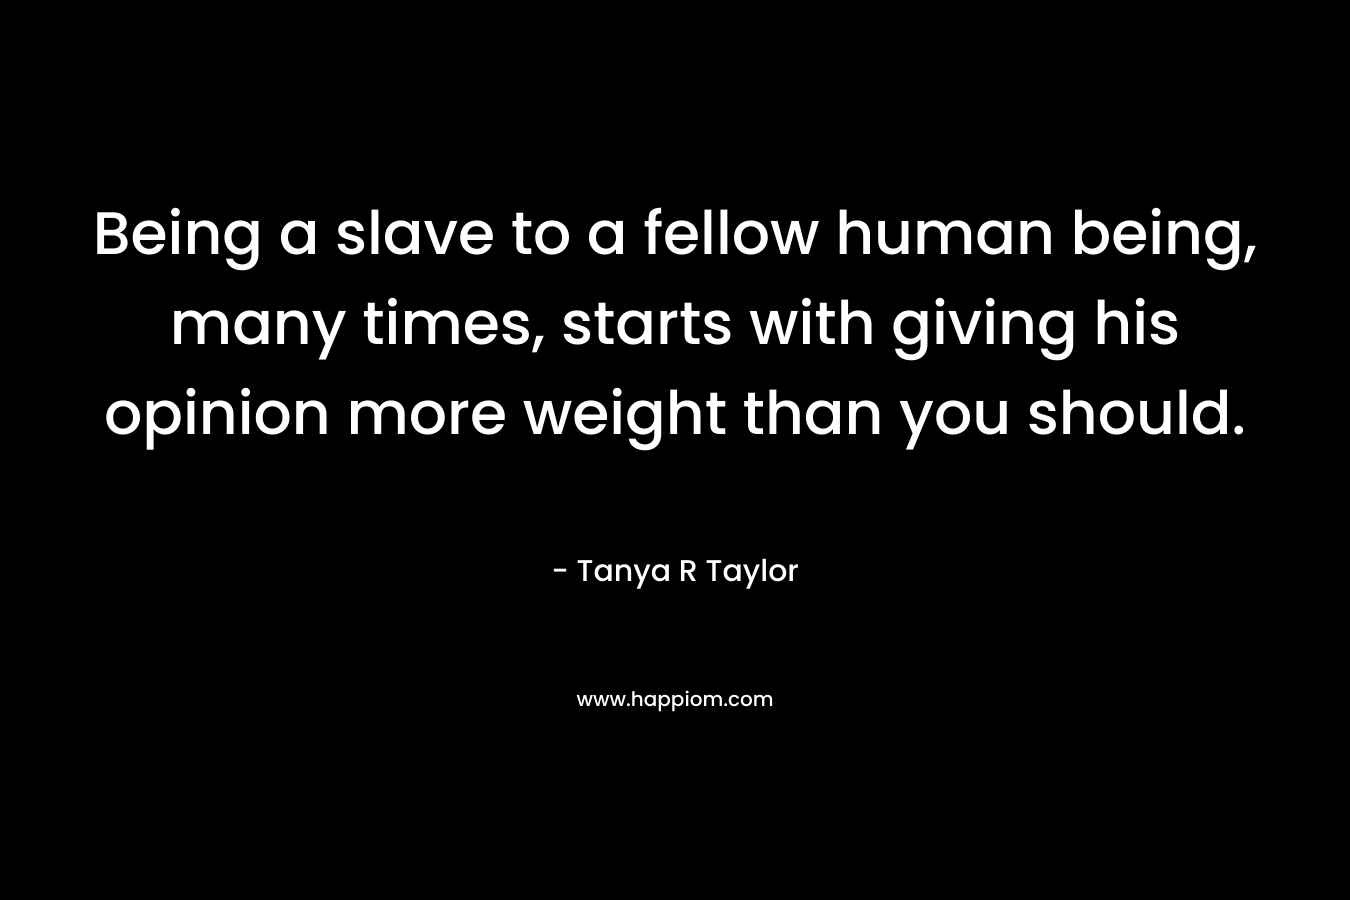 Being a slave to a fellow human being, many times, starts with giving his opinion more weight than you should. – Tanya R Taylor